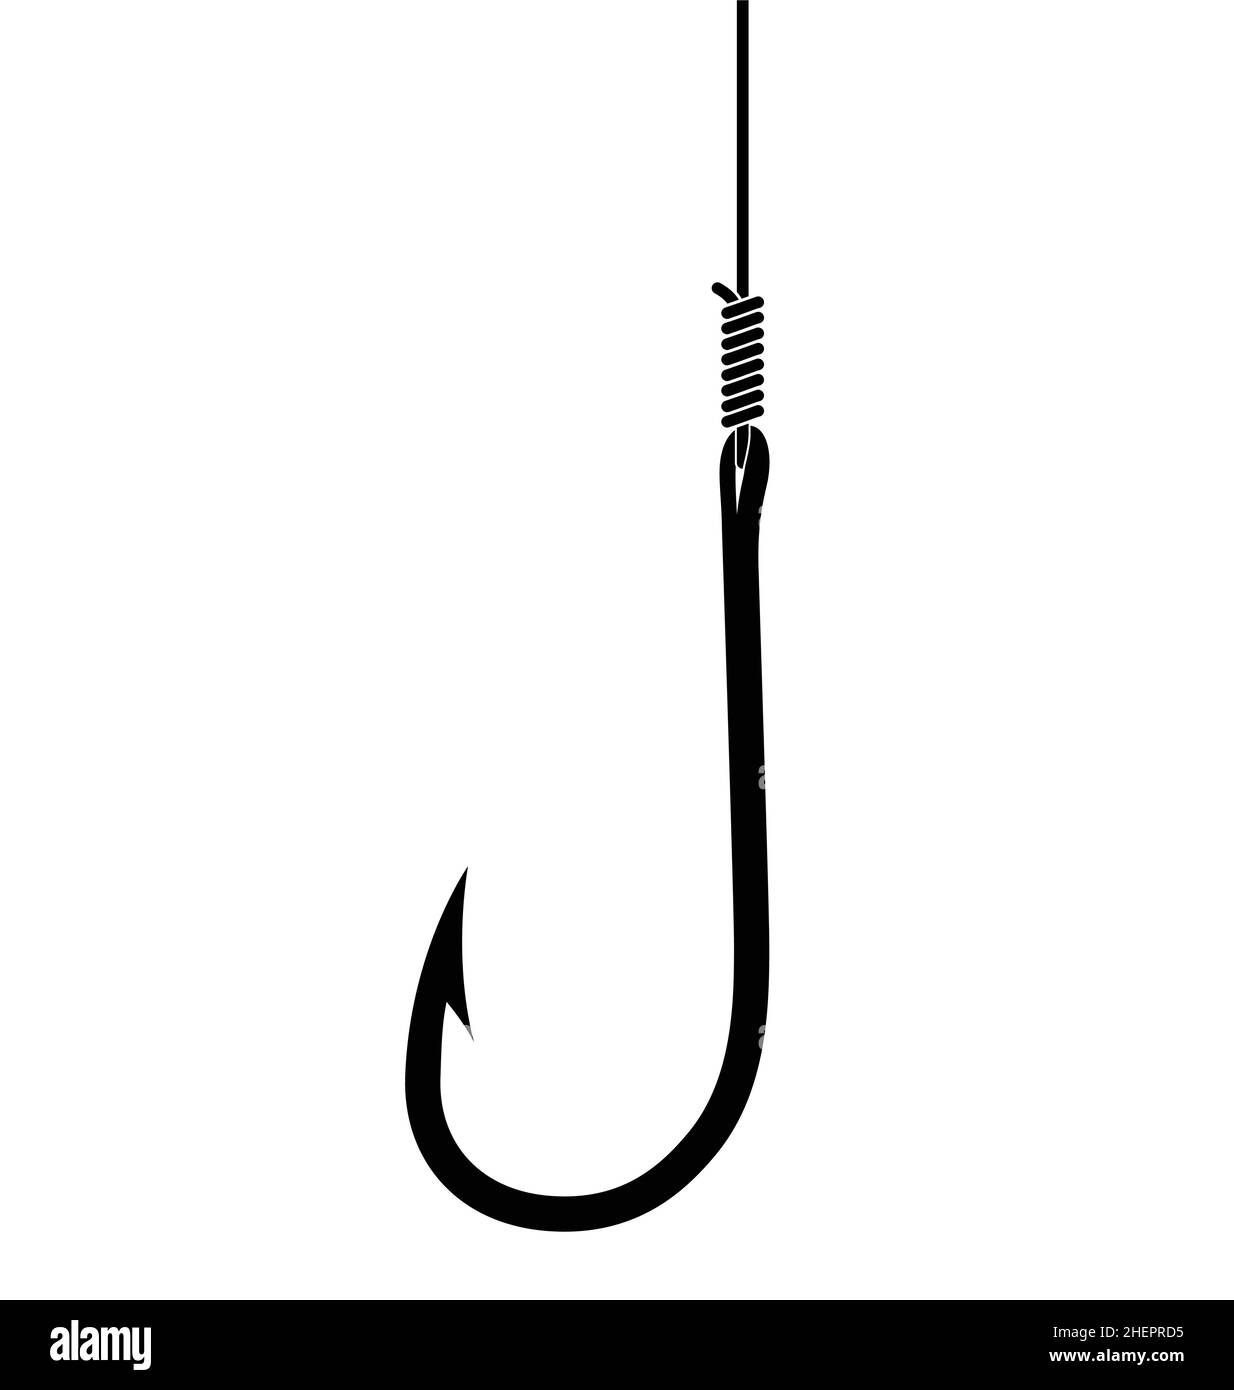 simple fishing fish hook on fishing line black silhouette isolated